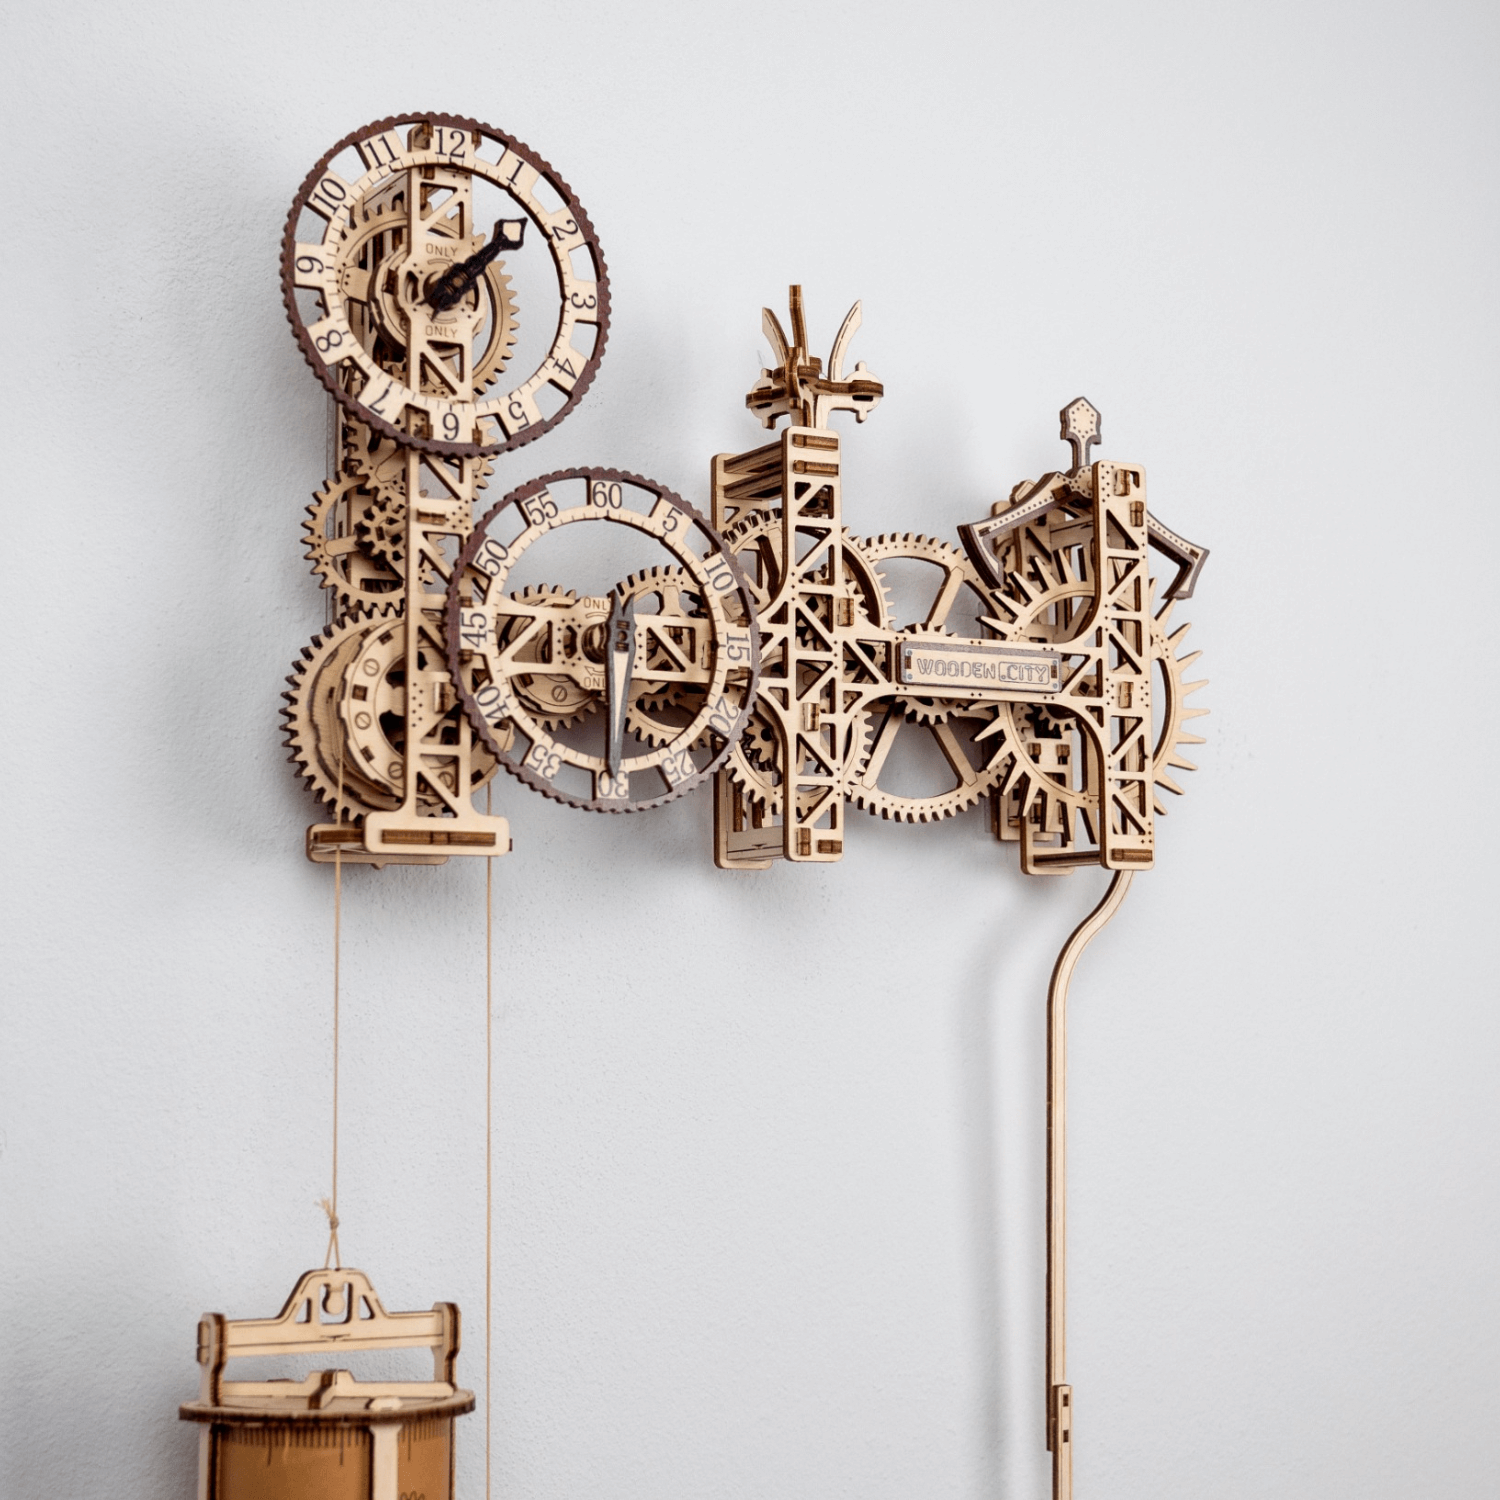 Steampunk Wall Clock | Wall Clock Mechanical Wooden Puzzle WoodenCity--